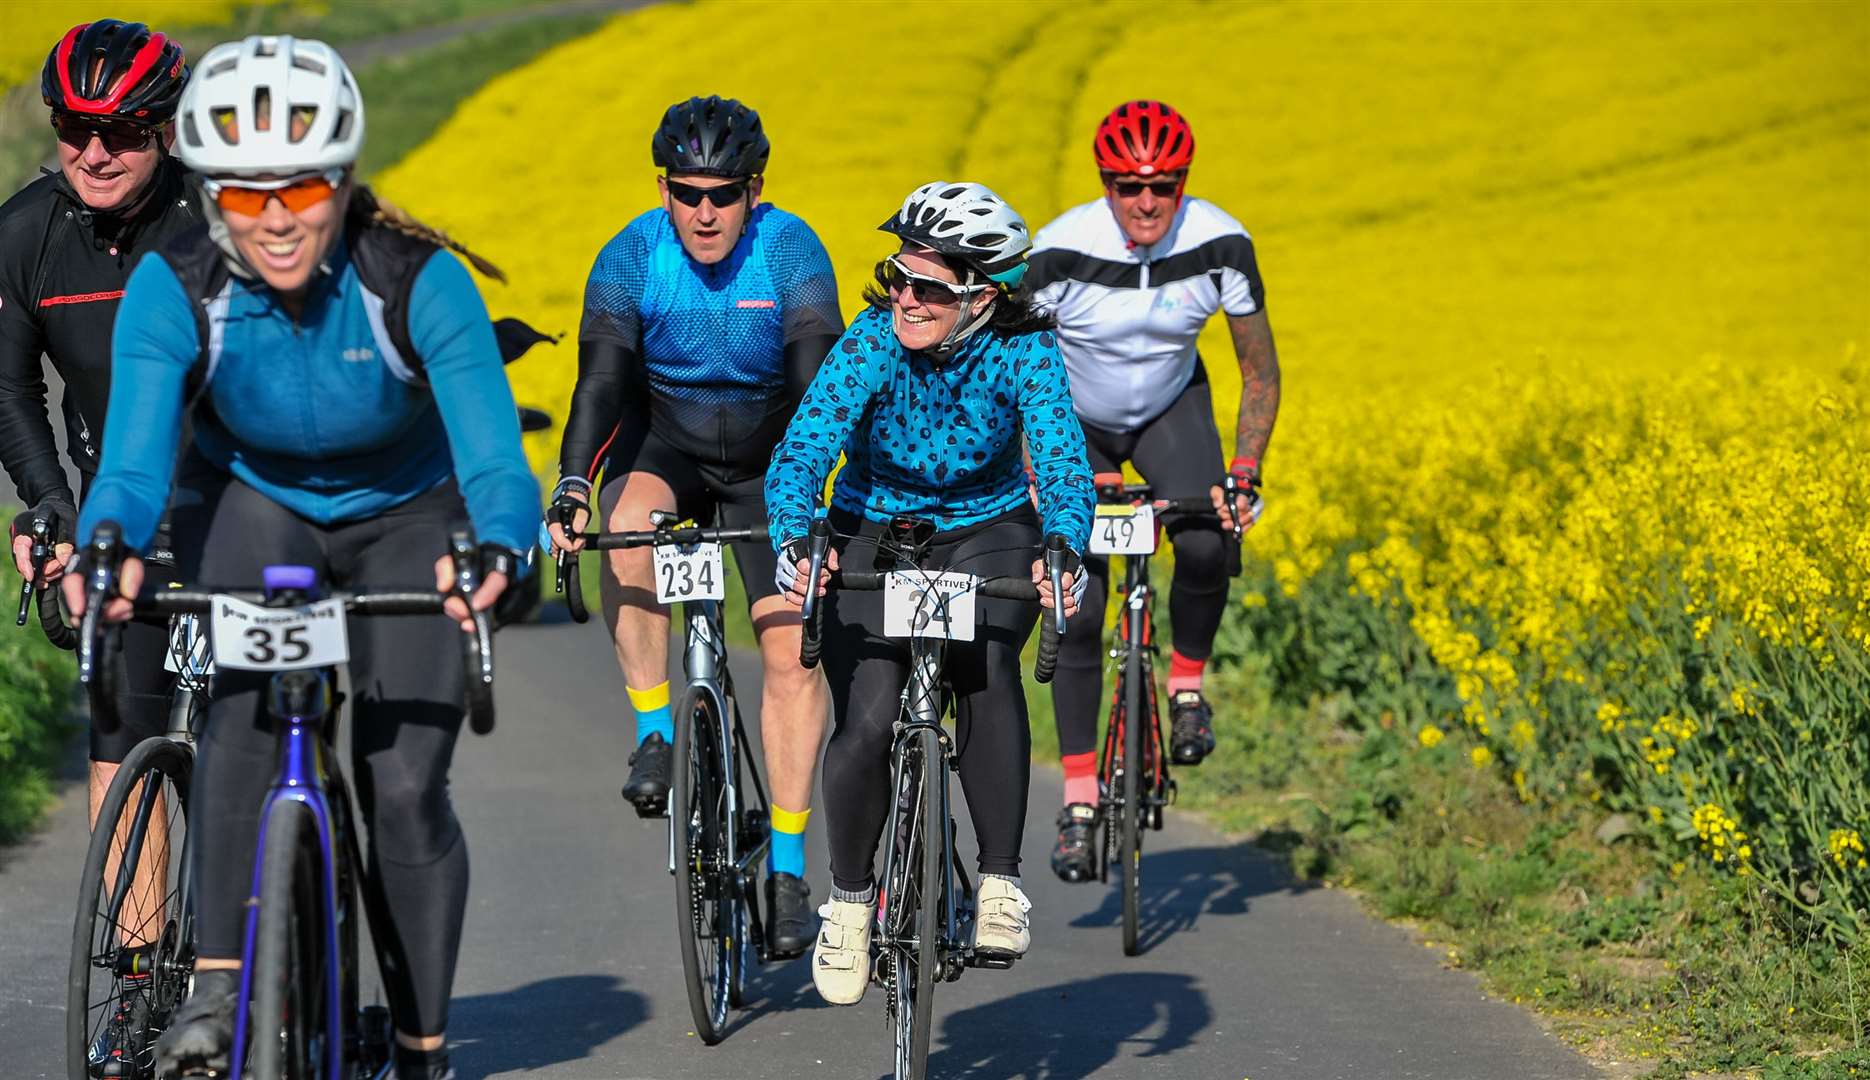 The East Kent Big Bike Ride took place this April from Betteshanger Park in Deal. Picture: KM Charity Team